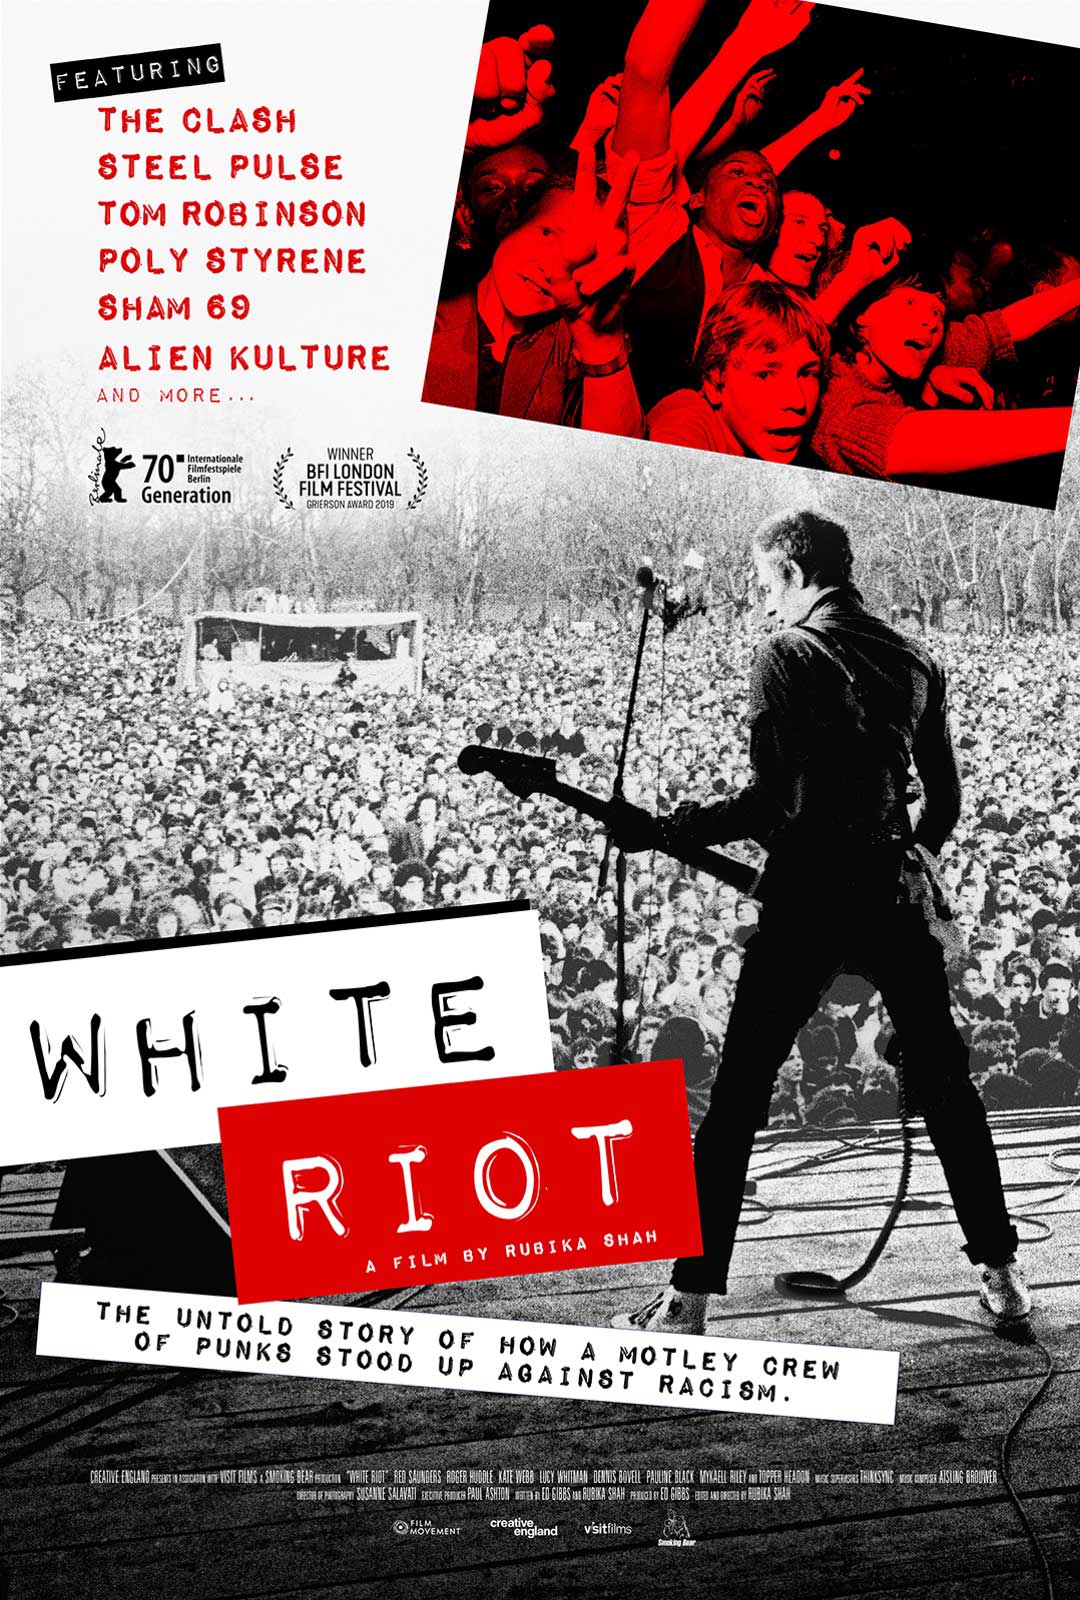 White Riot poster featuring grainy b&w image of Paul Simonon from The Clash playing in front of a crowd at Rock Against Racism's 1978 concert. photo ©Syd Shelton